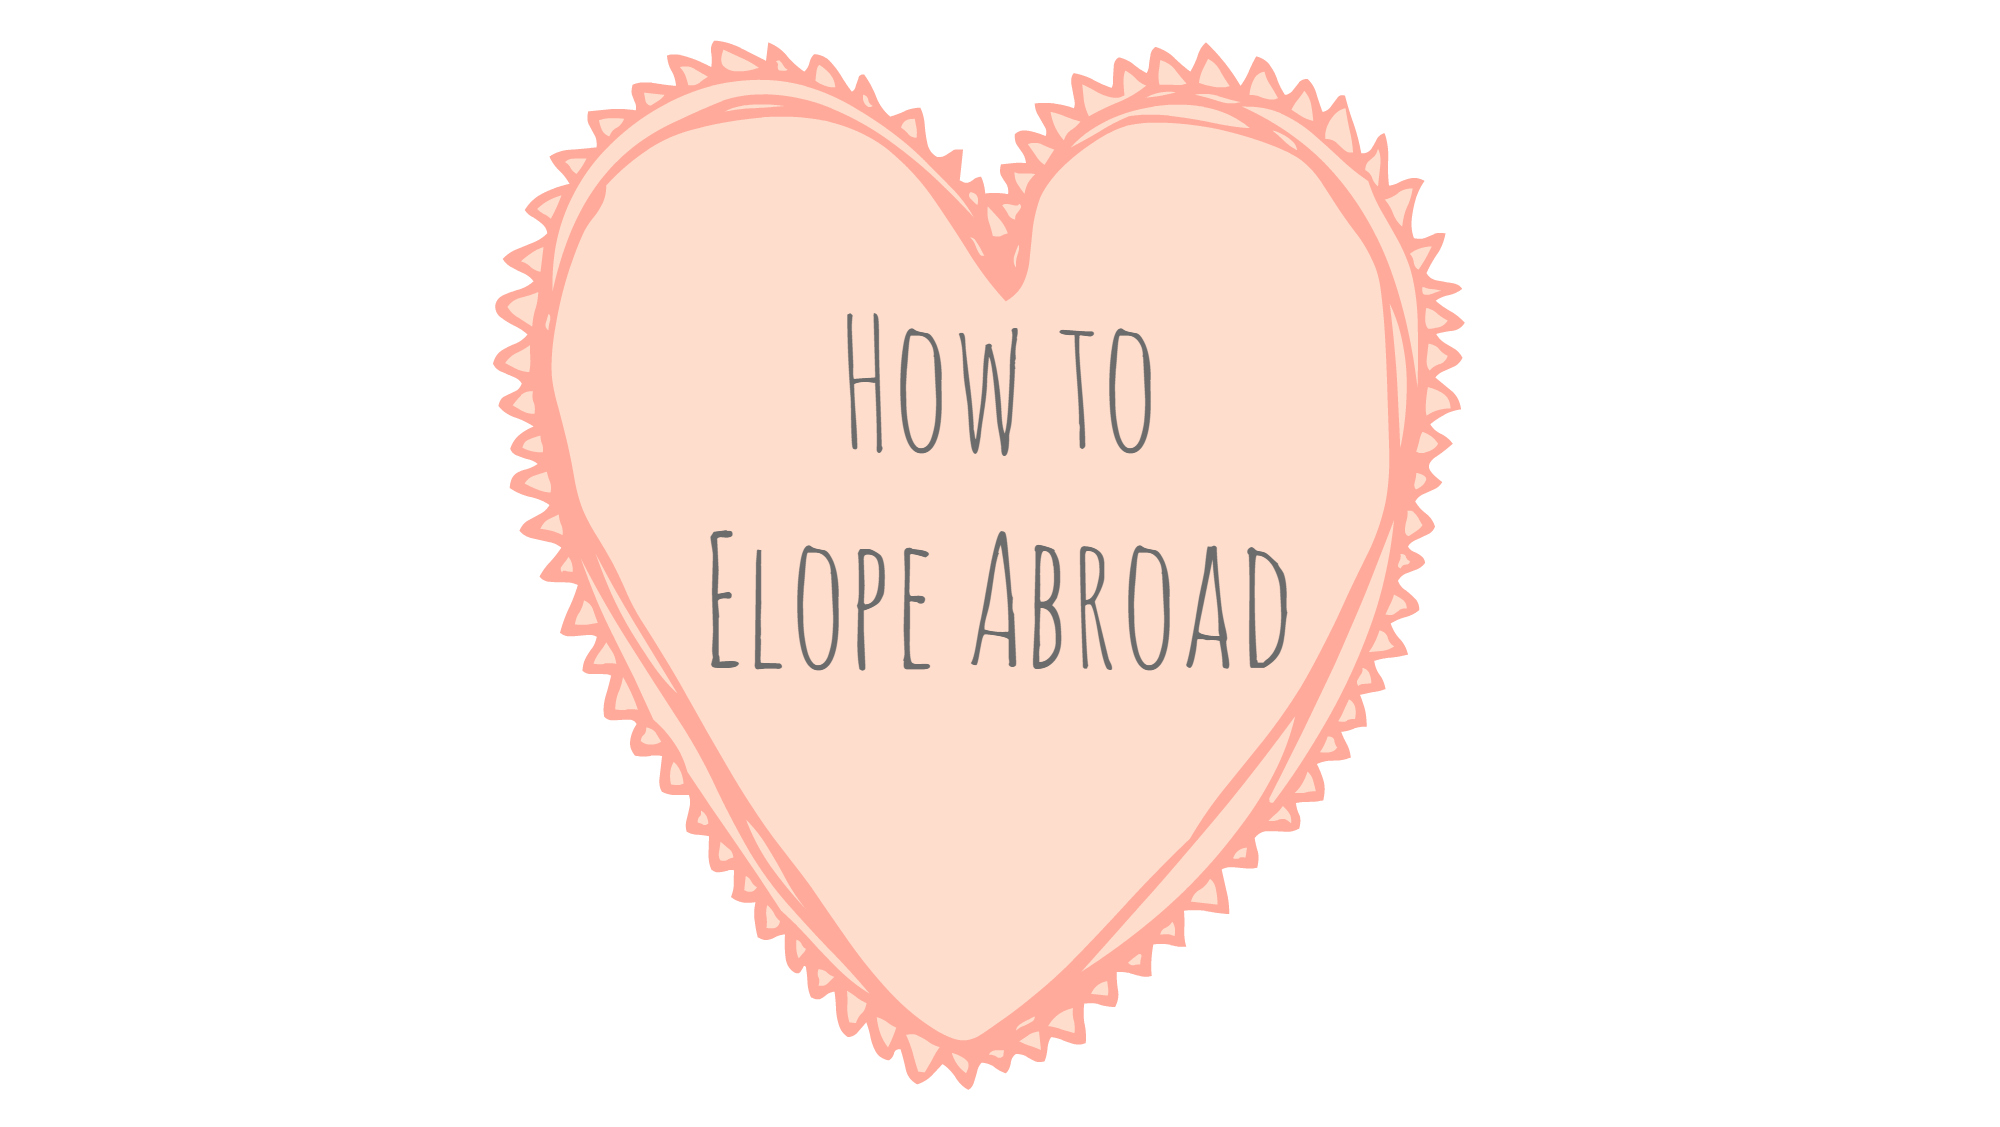 How to Elope Abroad